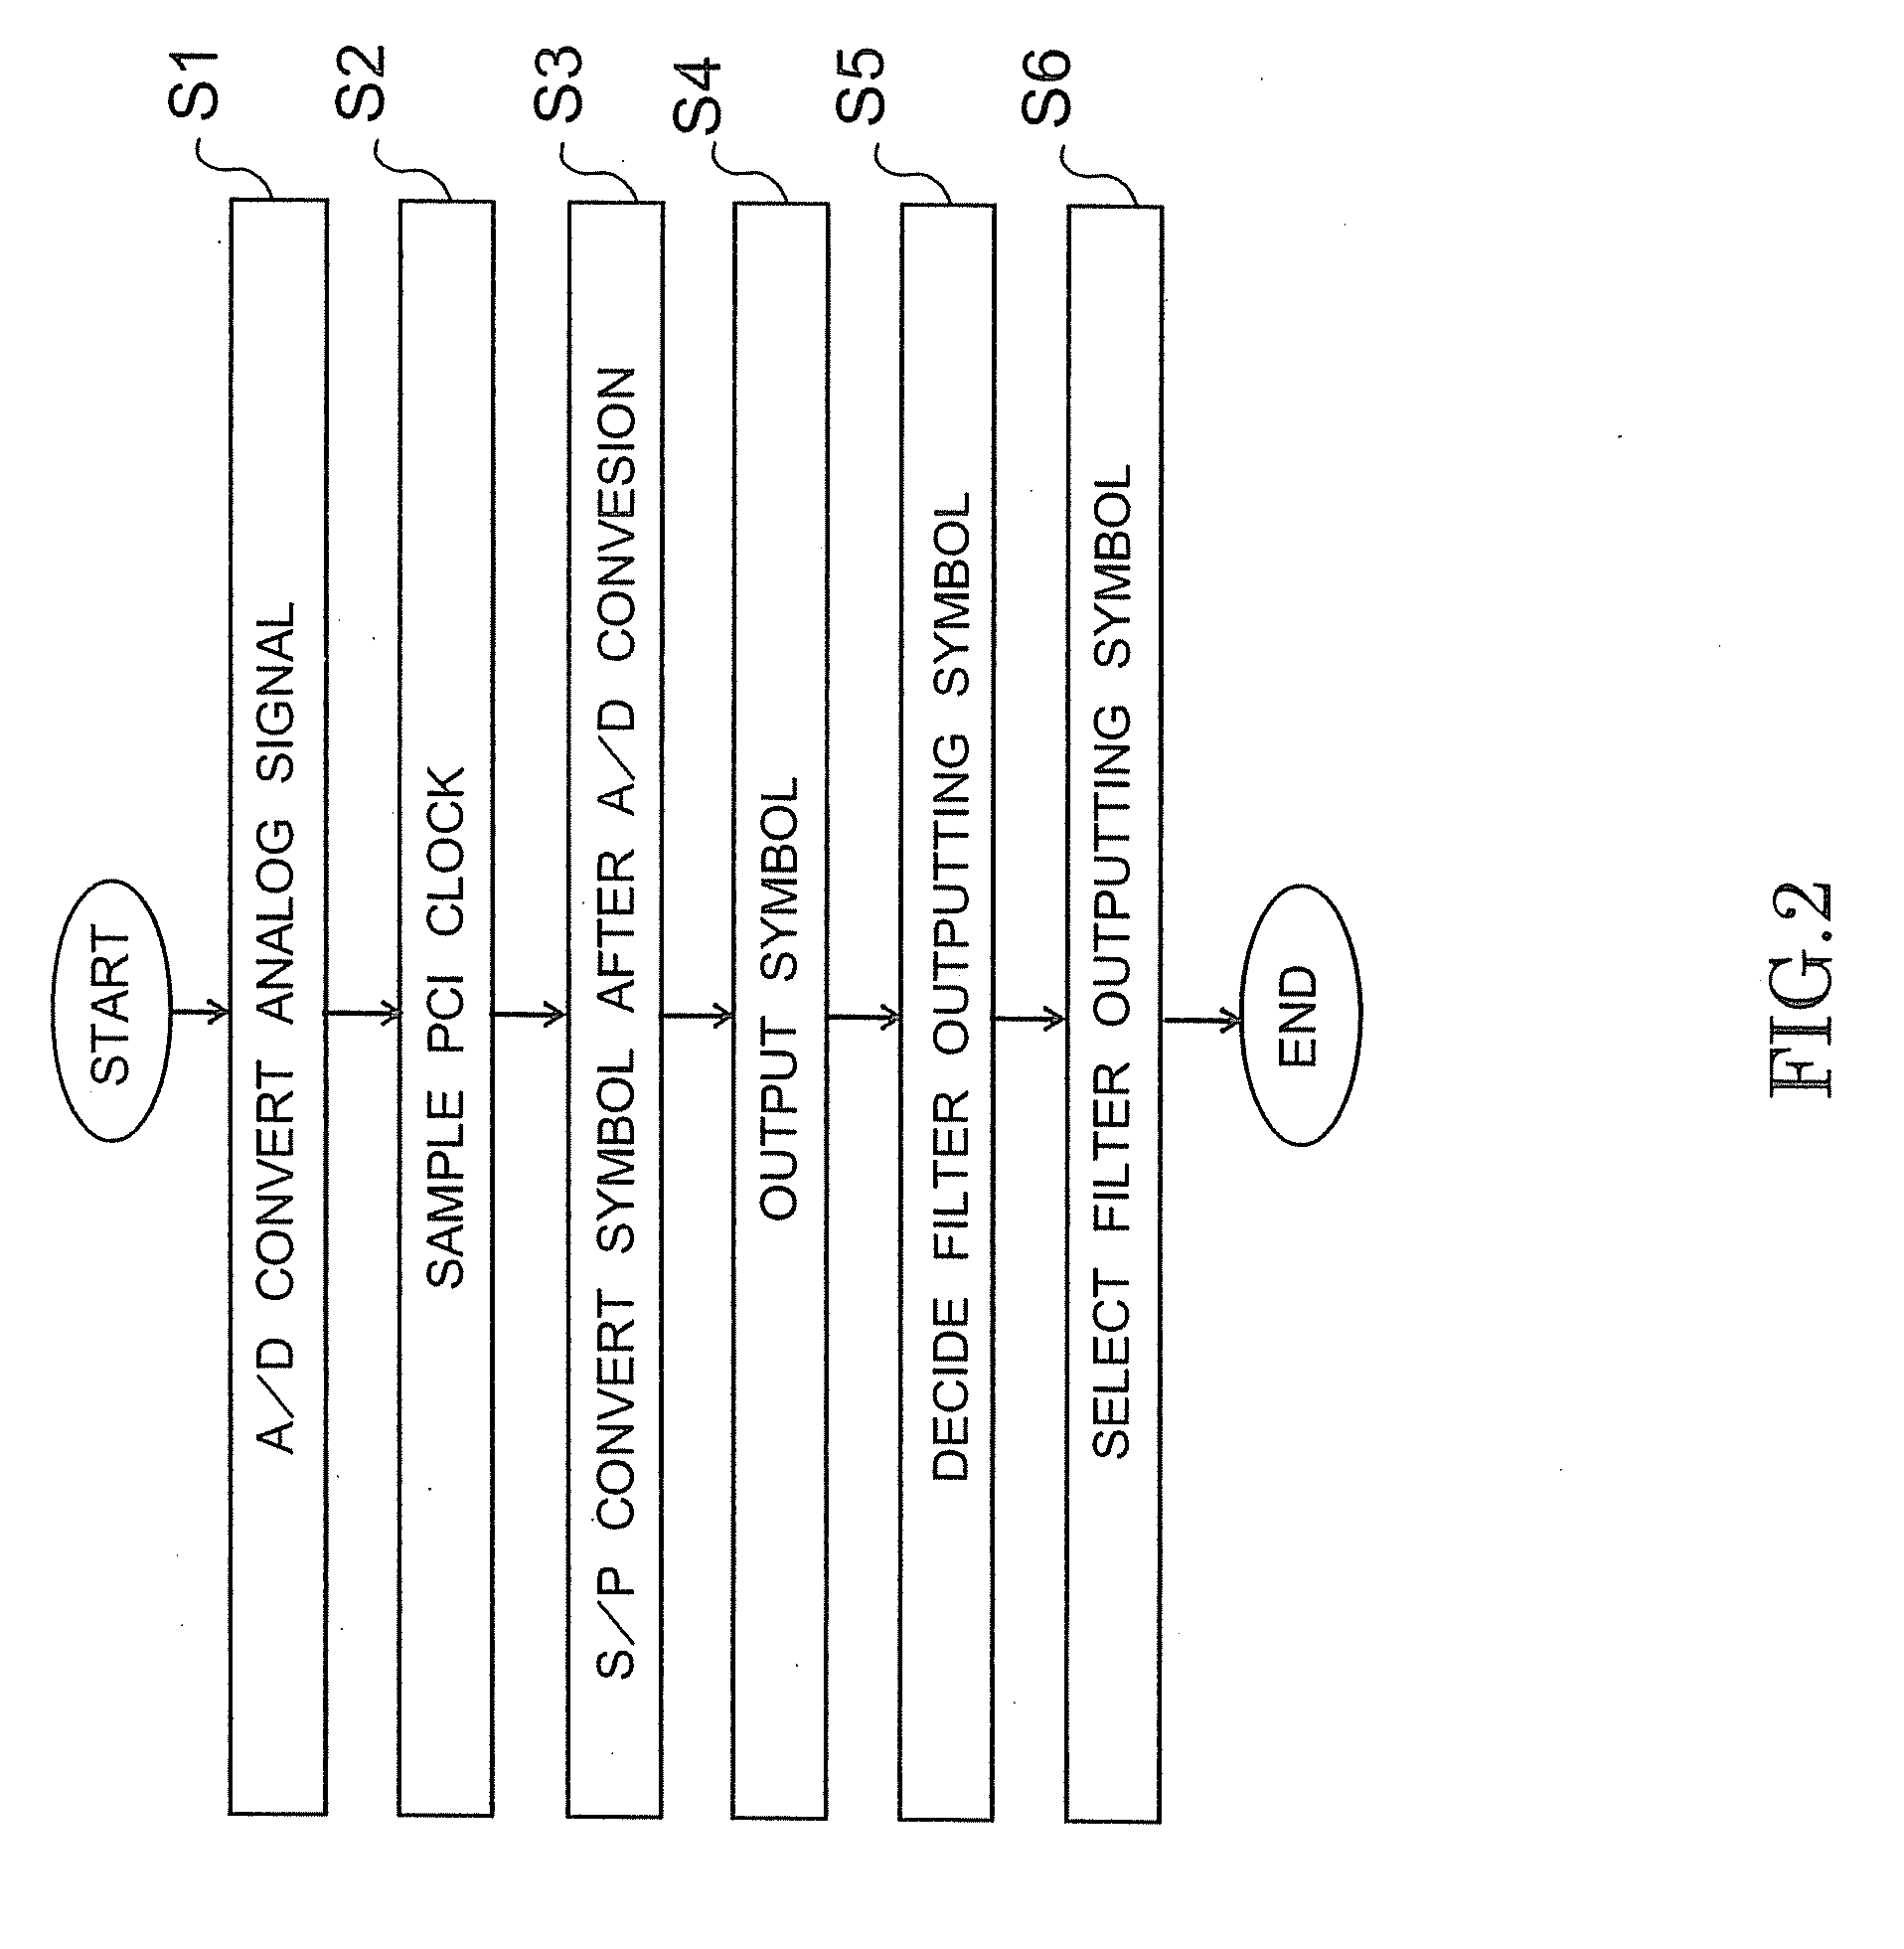 Interference reduction device